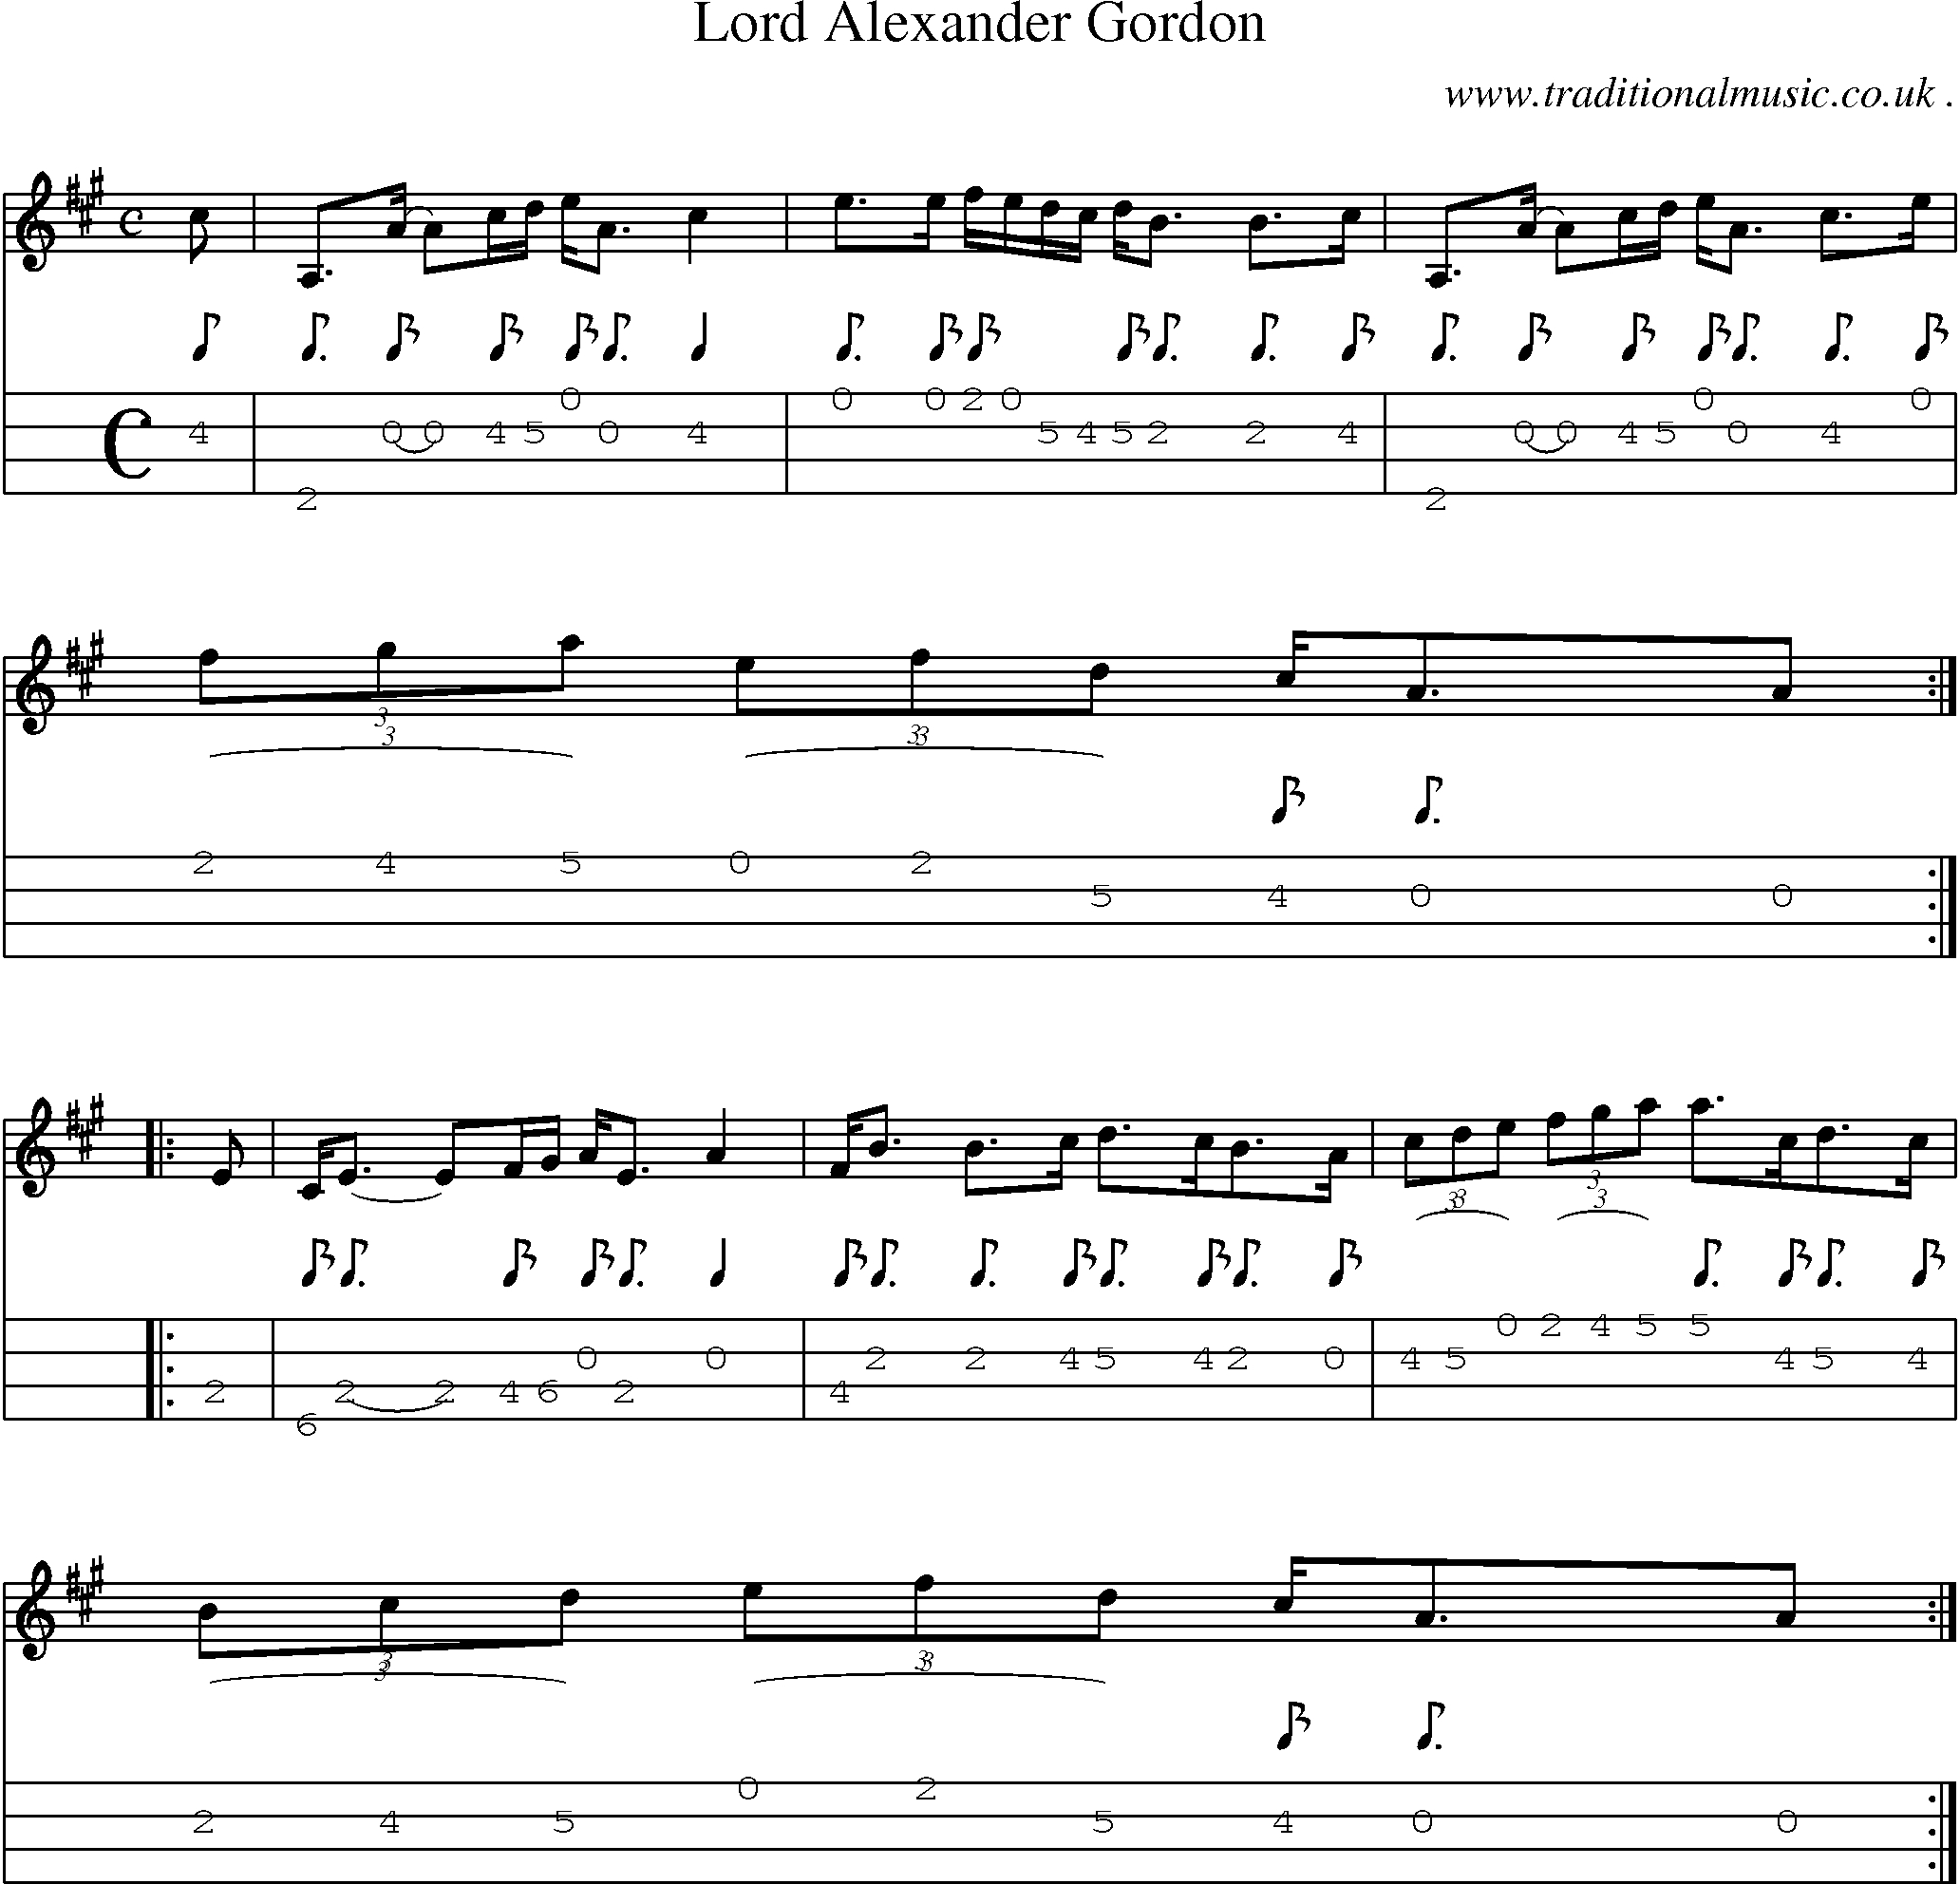 Sheet-music  score, Chords and Mandolin Tabs for Lord Alexander Gordon